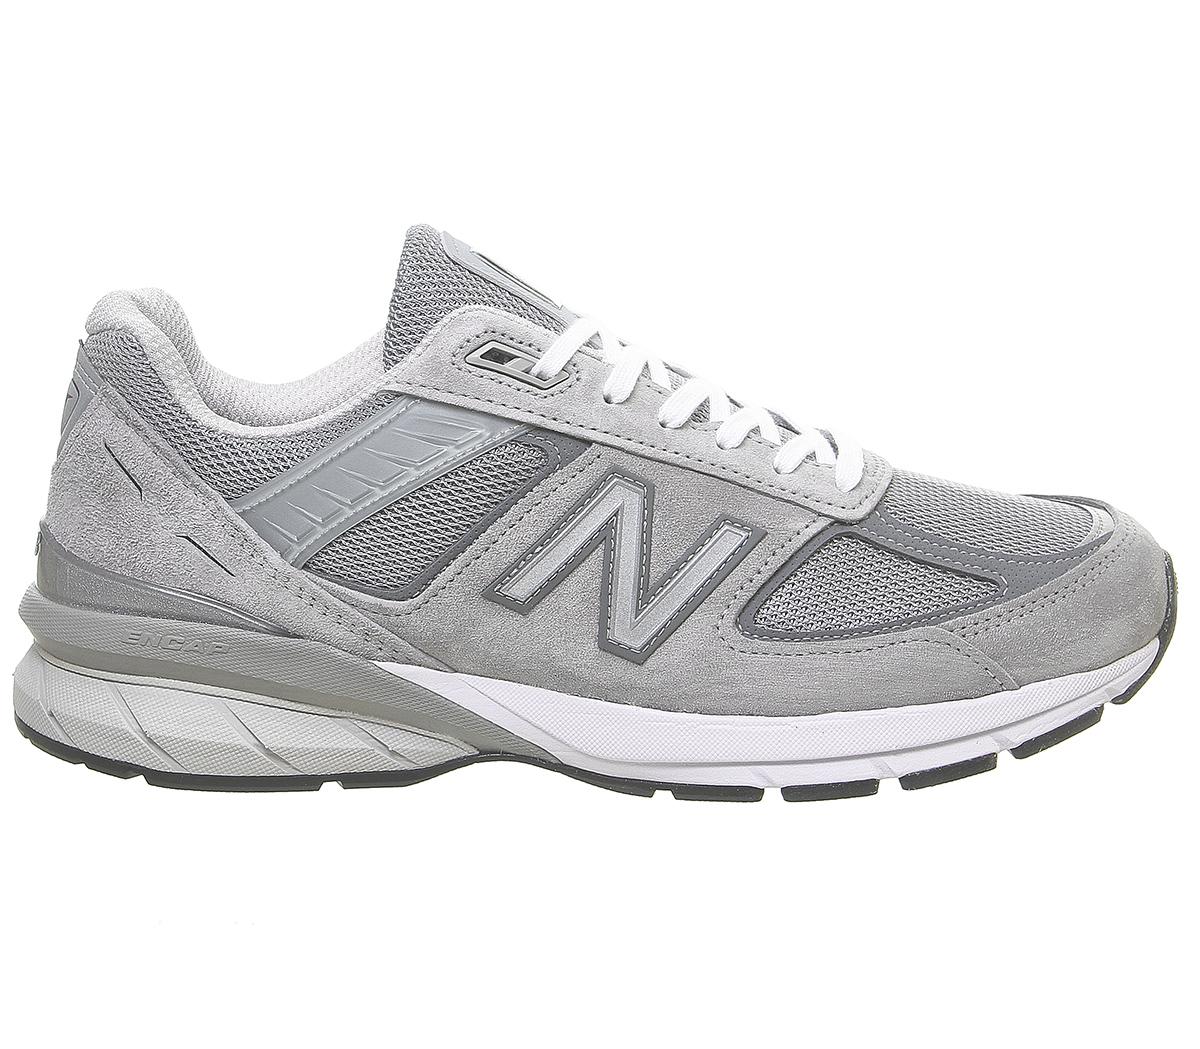 New Balance 990 Trainers Grey - His trainers